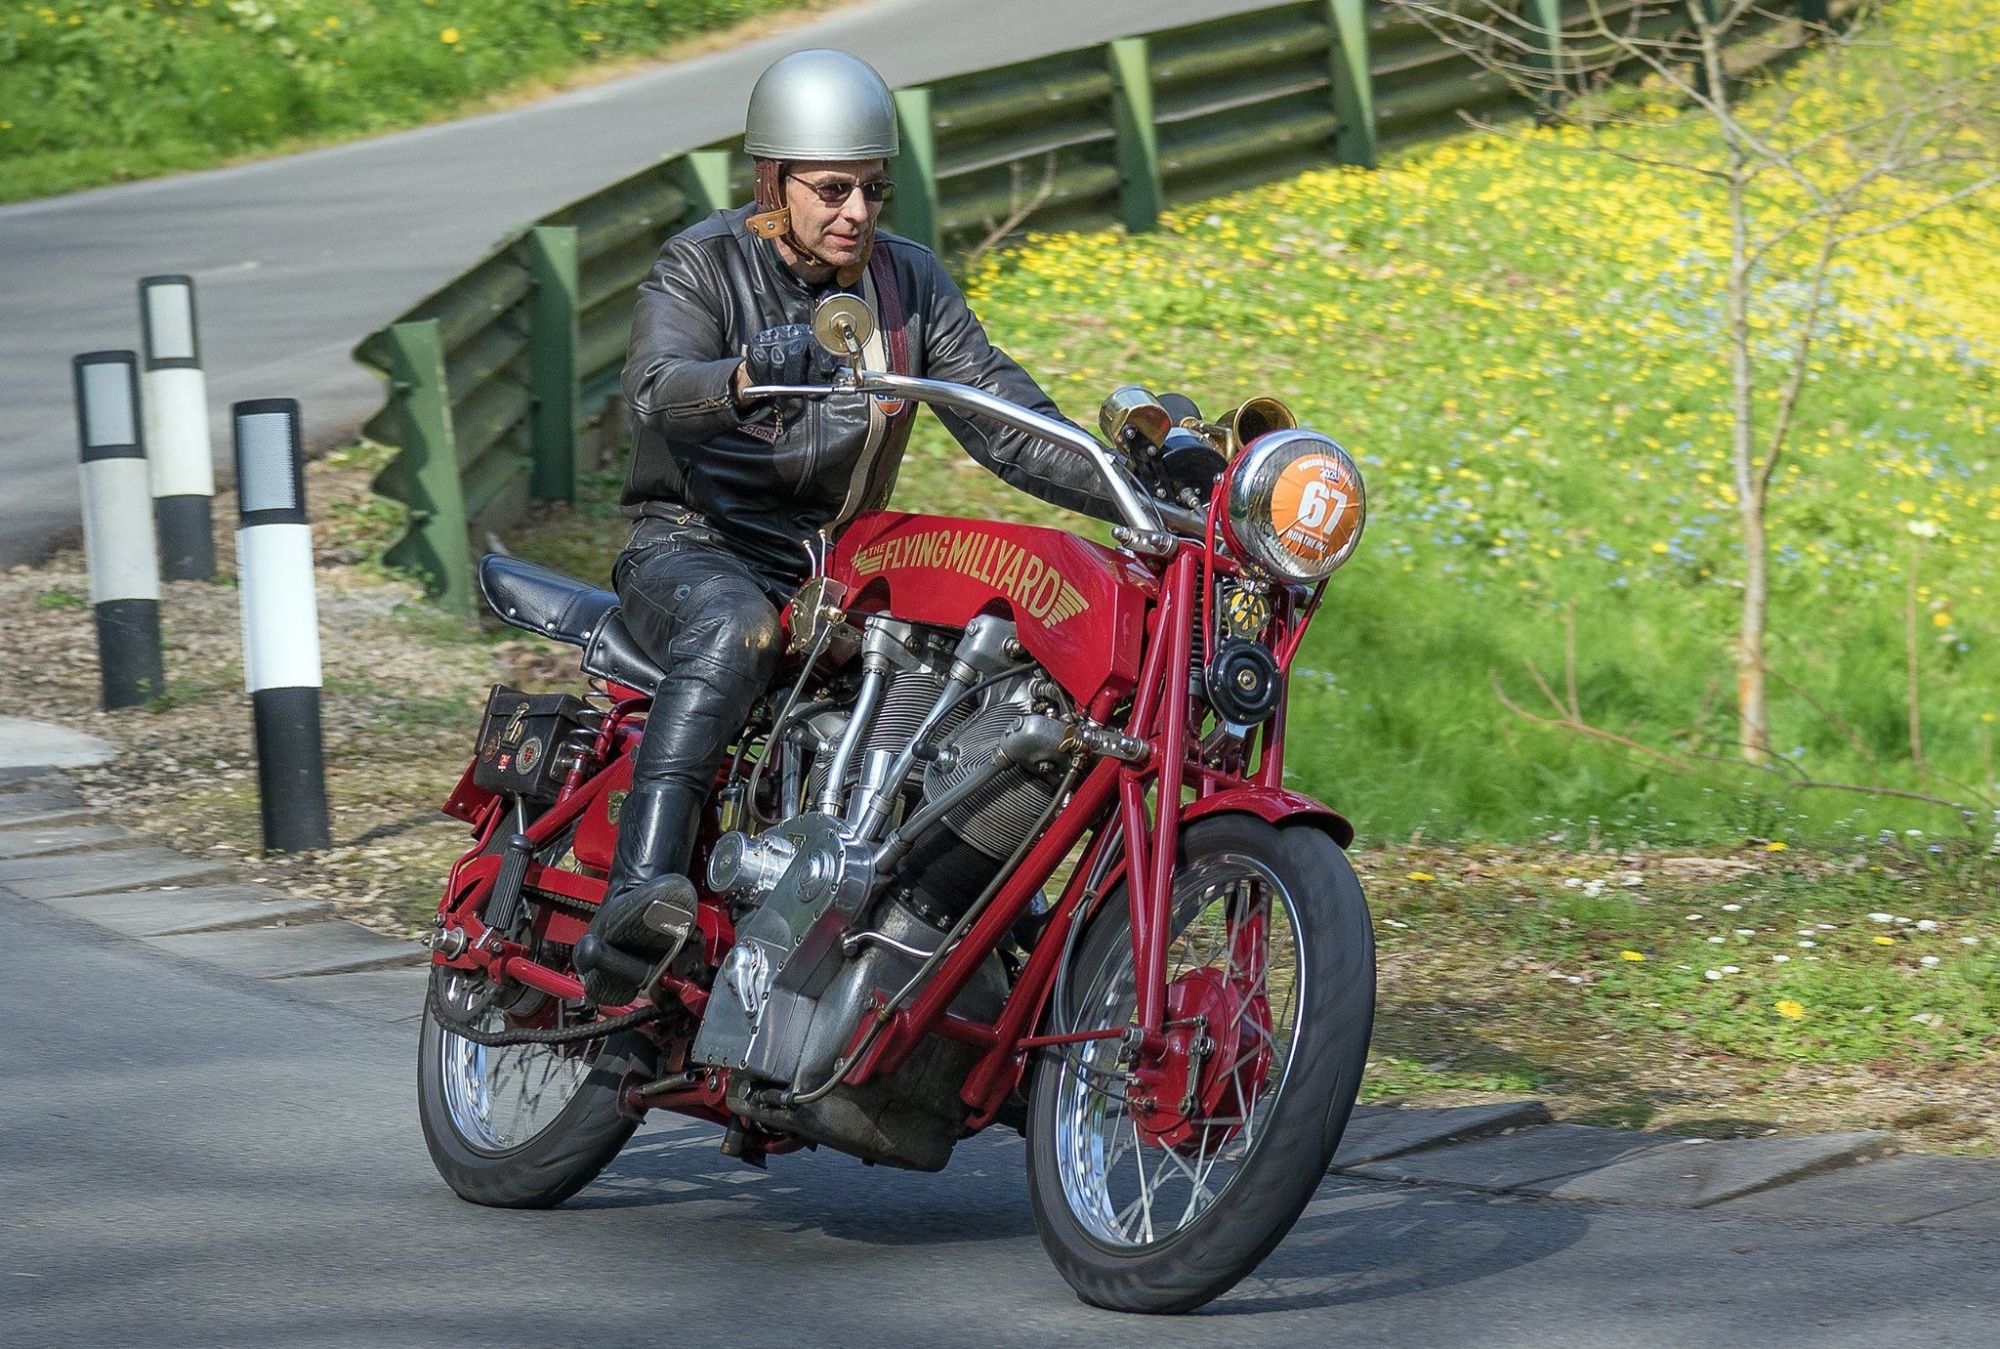 Iconic Motorcycles to take to Prescott Hill Climb